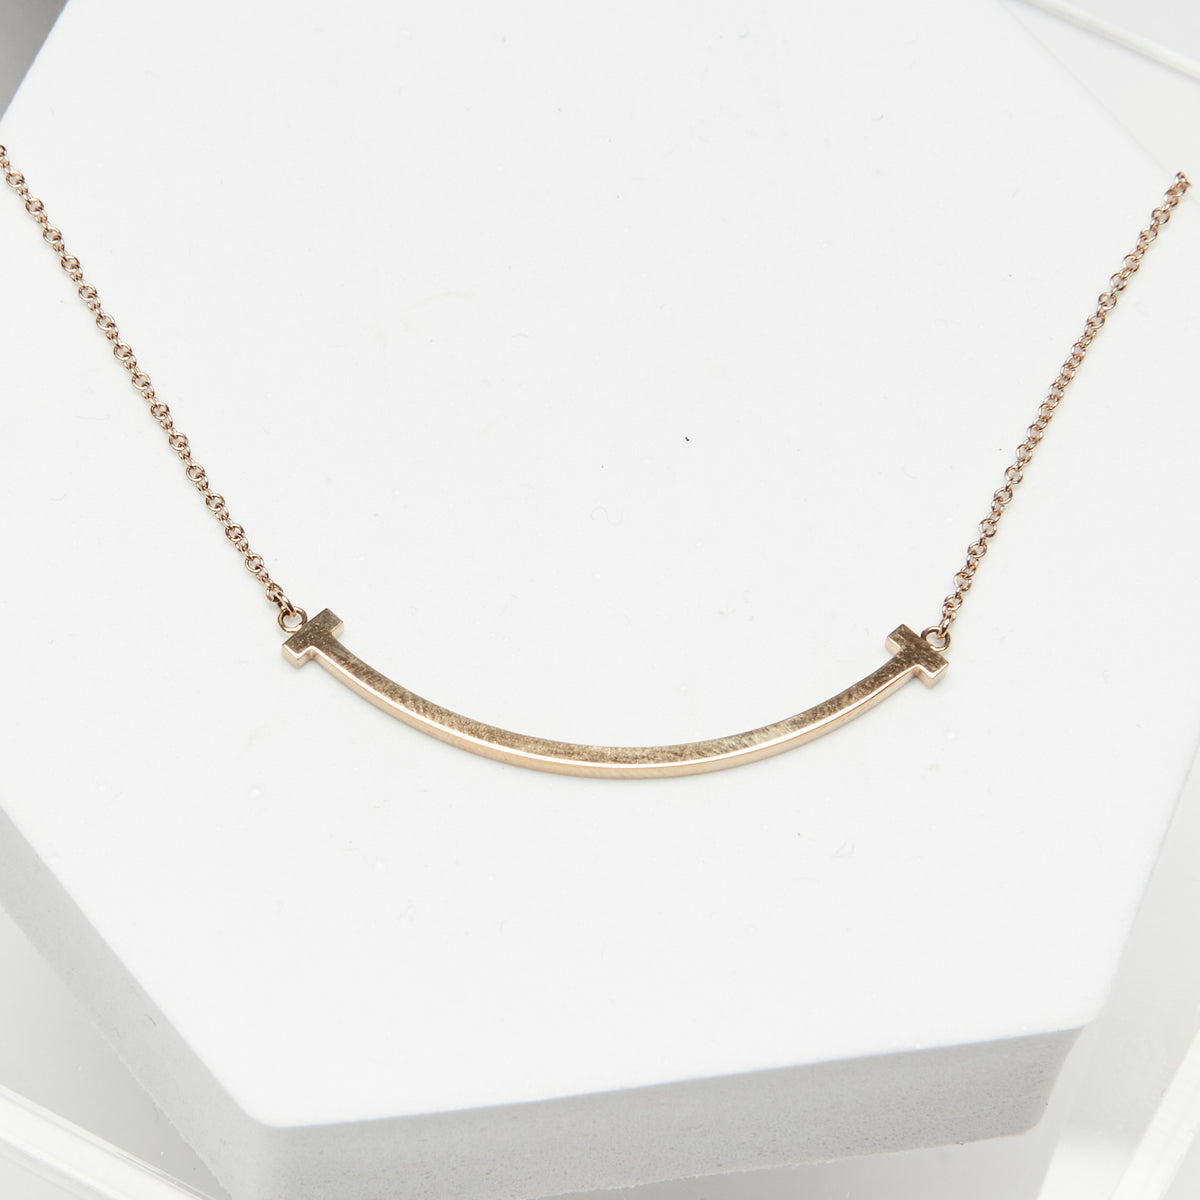 Excellent Pre-Loved Bar Pendant Necklace in Yellow Gold. (close up)